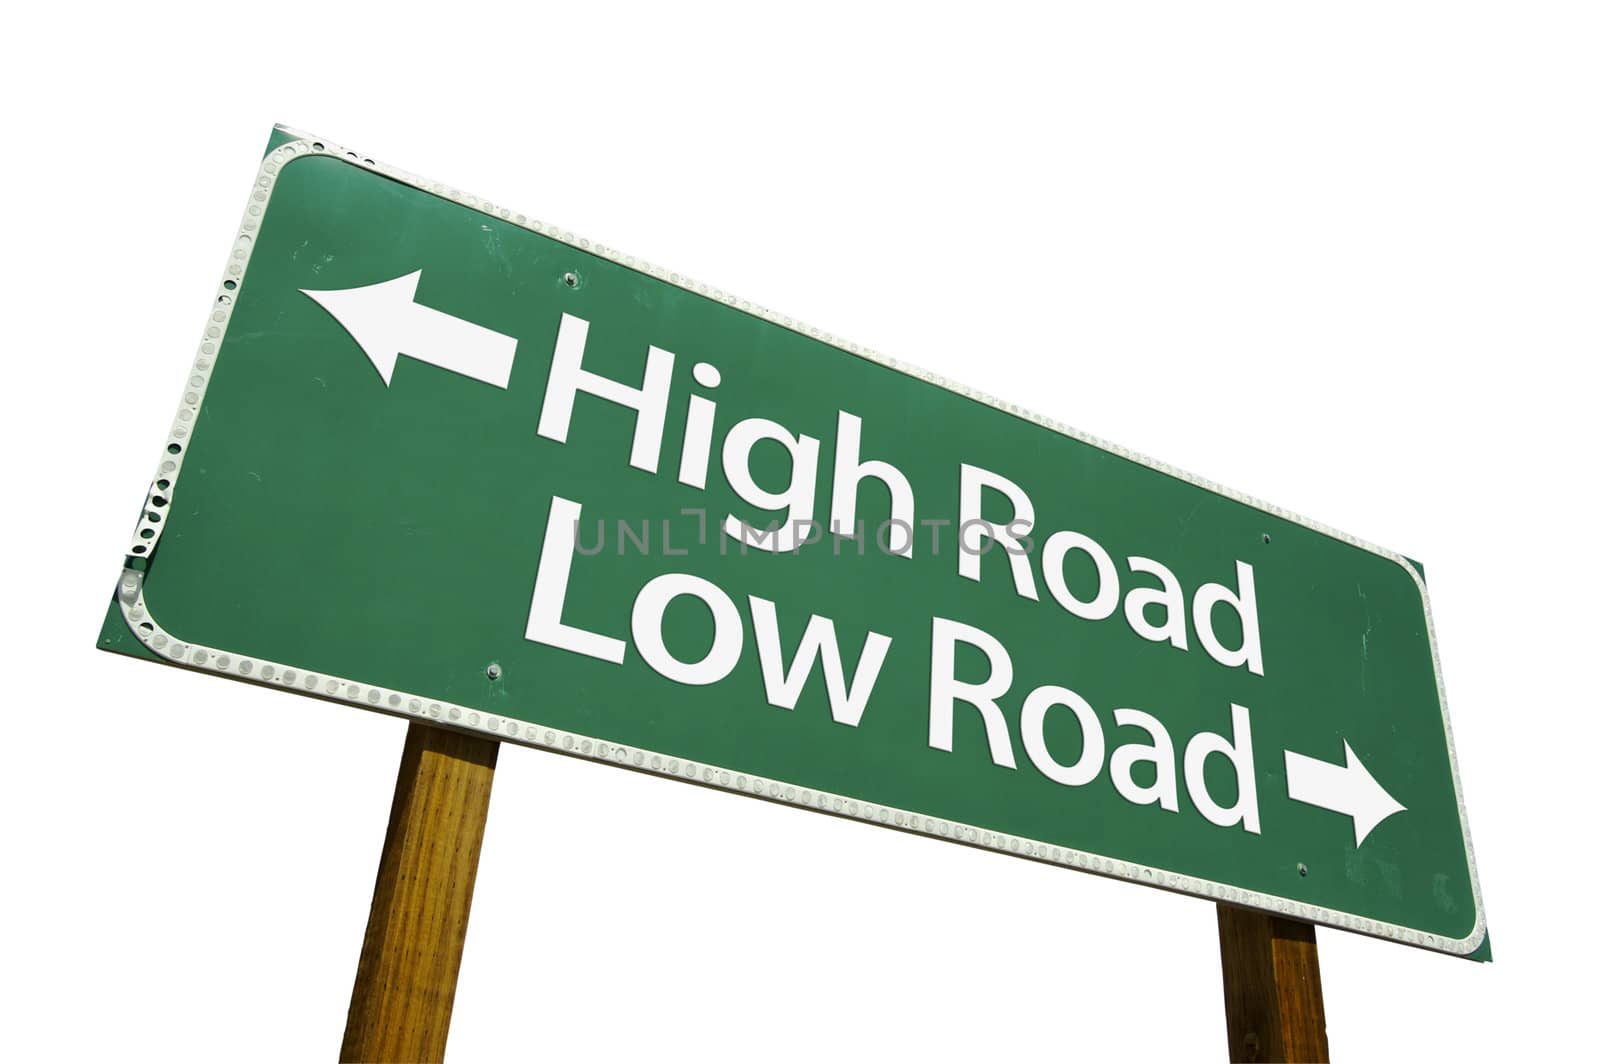 High Road, Low Road  - Road Sign with Clipping Path by Feverpitched